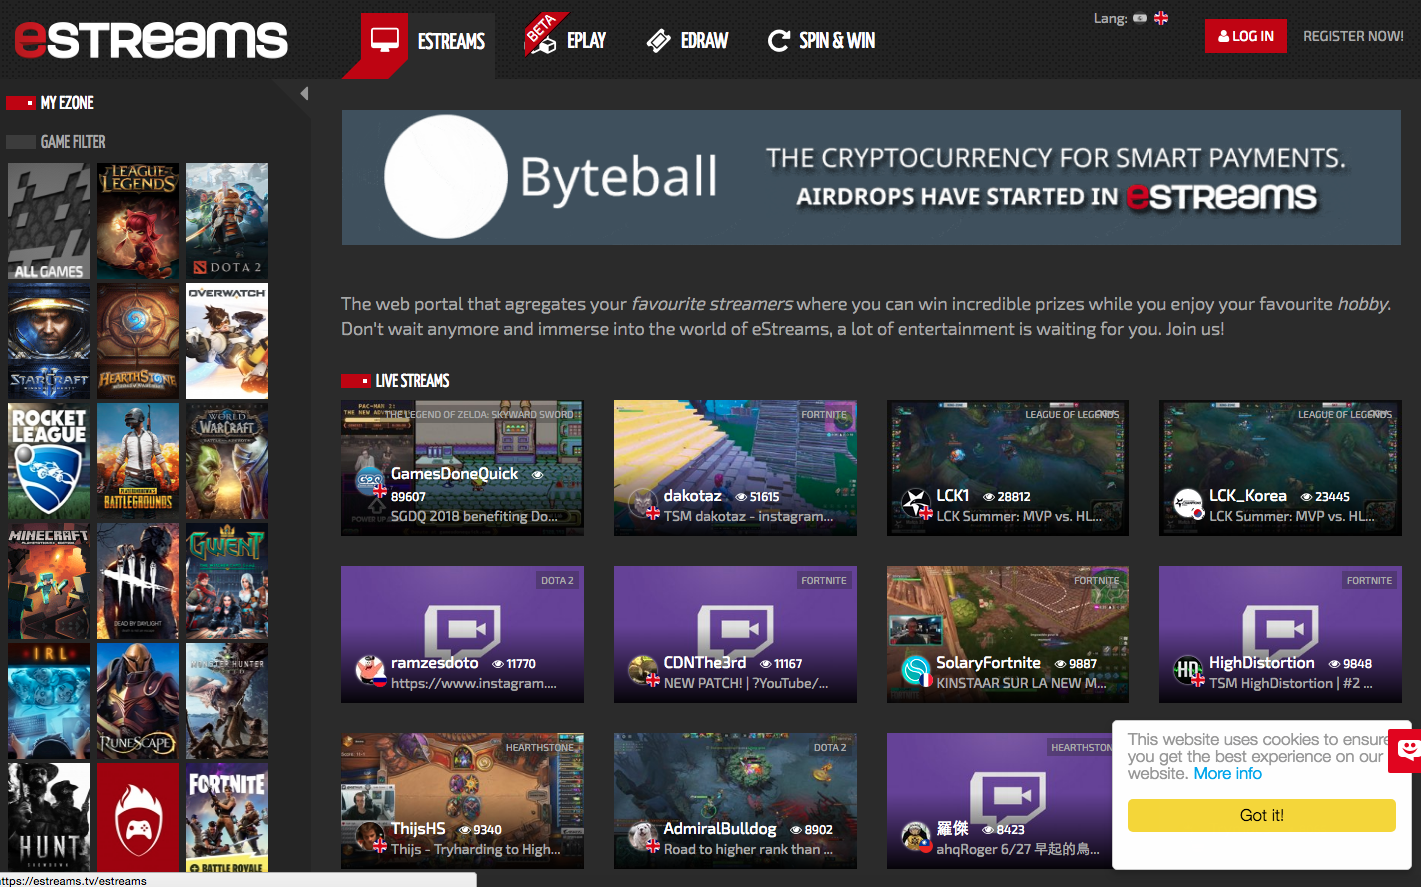 Telefónica-backed eStream.tv taps cryptocurrency for eSports - Digital ...